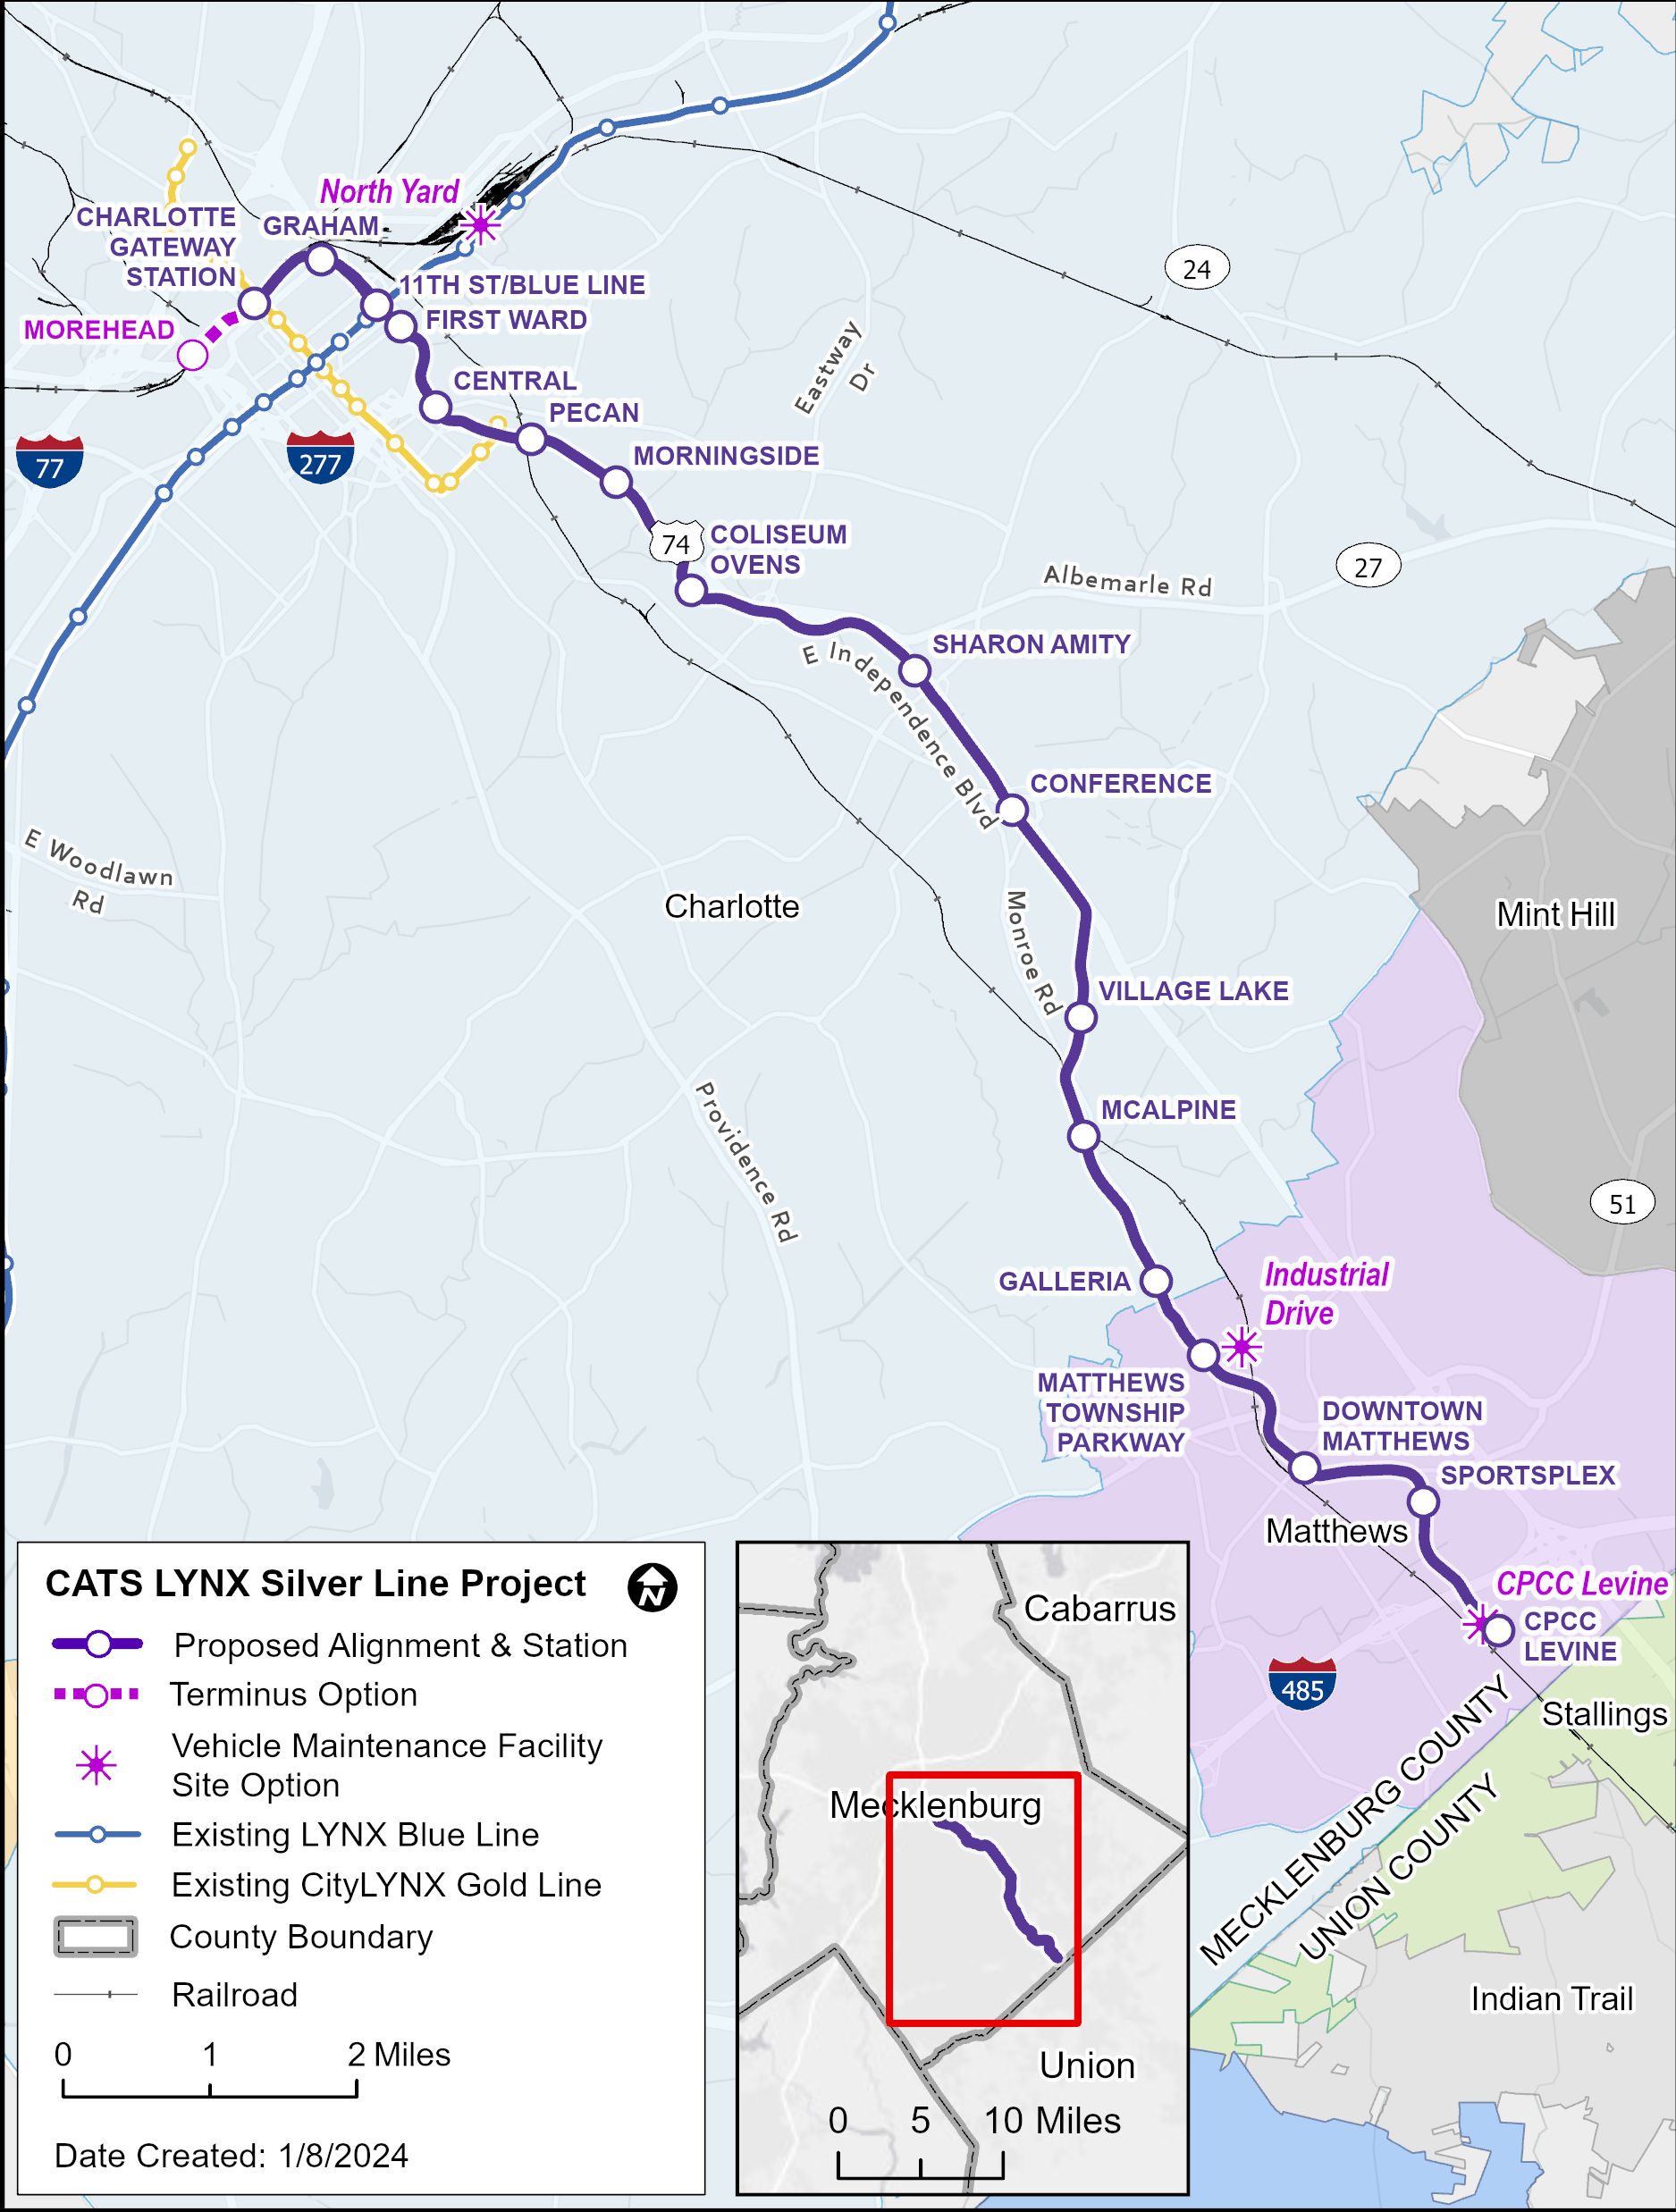 Silver line Project Vicinity map from morehead to CPCC levine